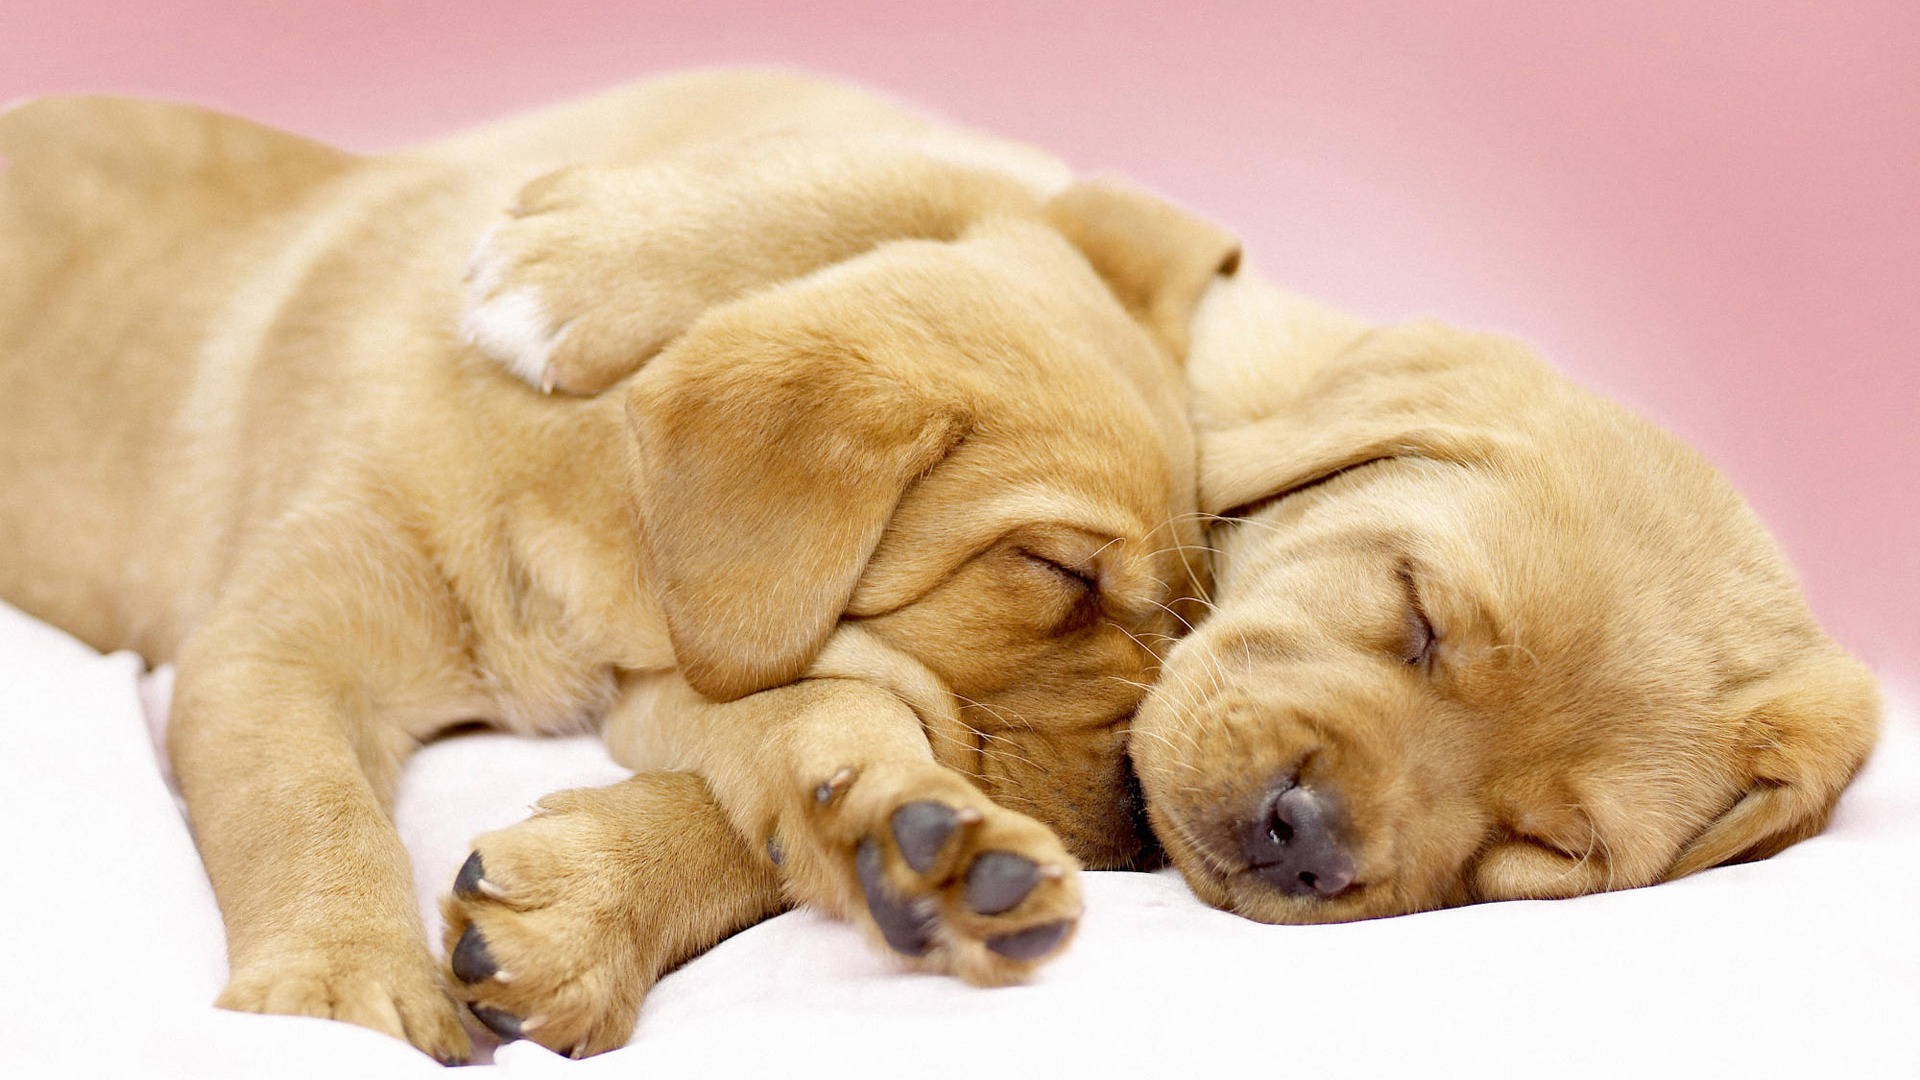 Puppy Photo HD wallpapers (7) #1 - 1920x1080